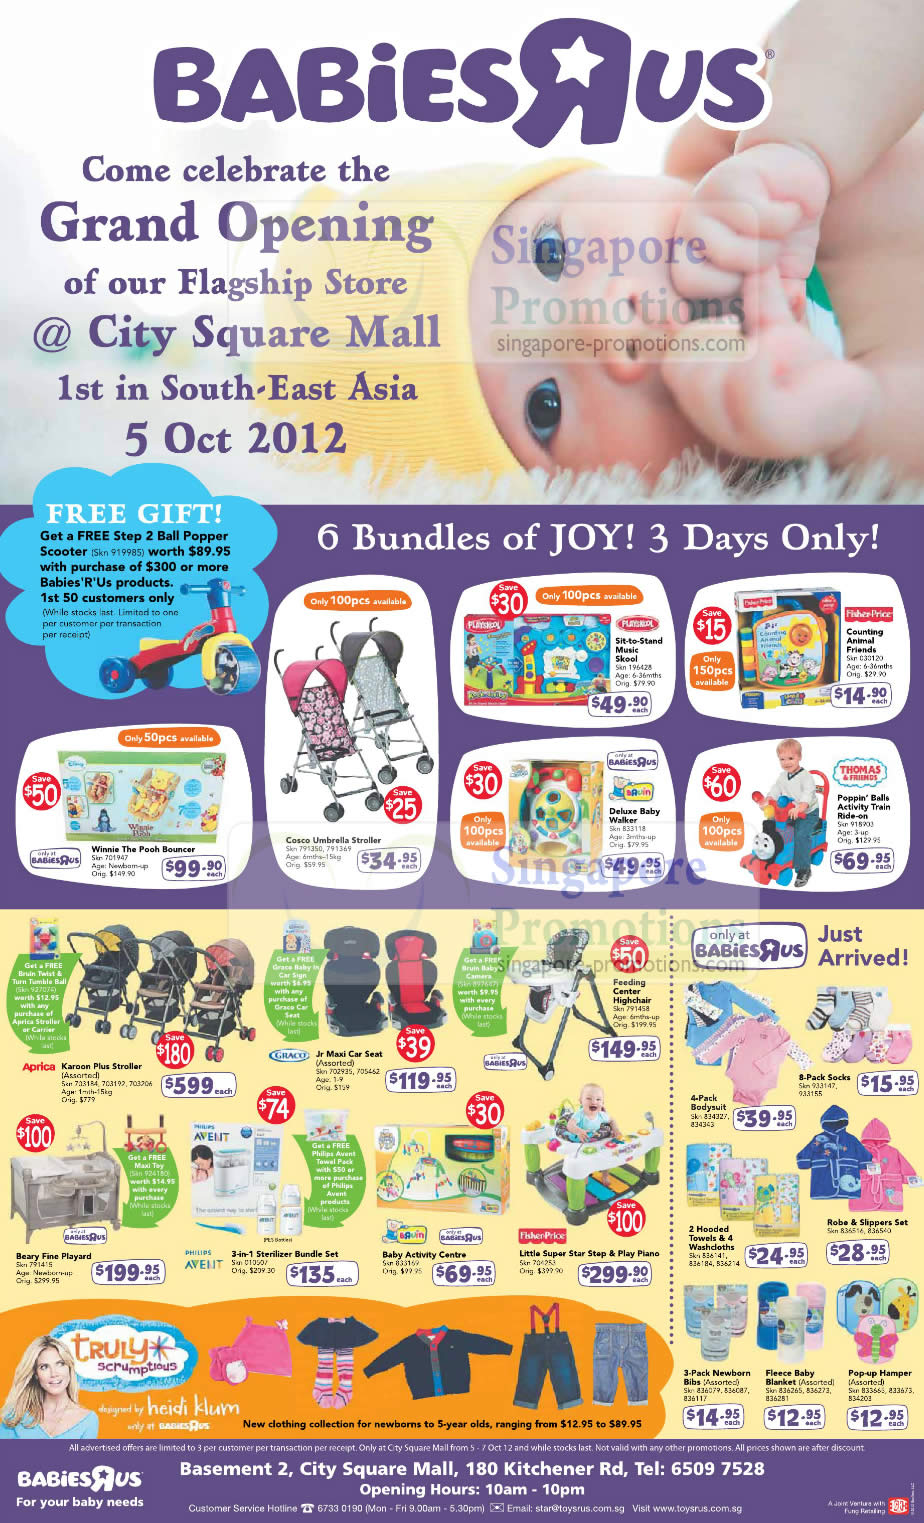 Featured image for Toys "R" Us Grand Opening Promotions @ City Square Mall 5 - 7 Oct 2012